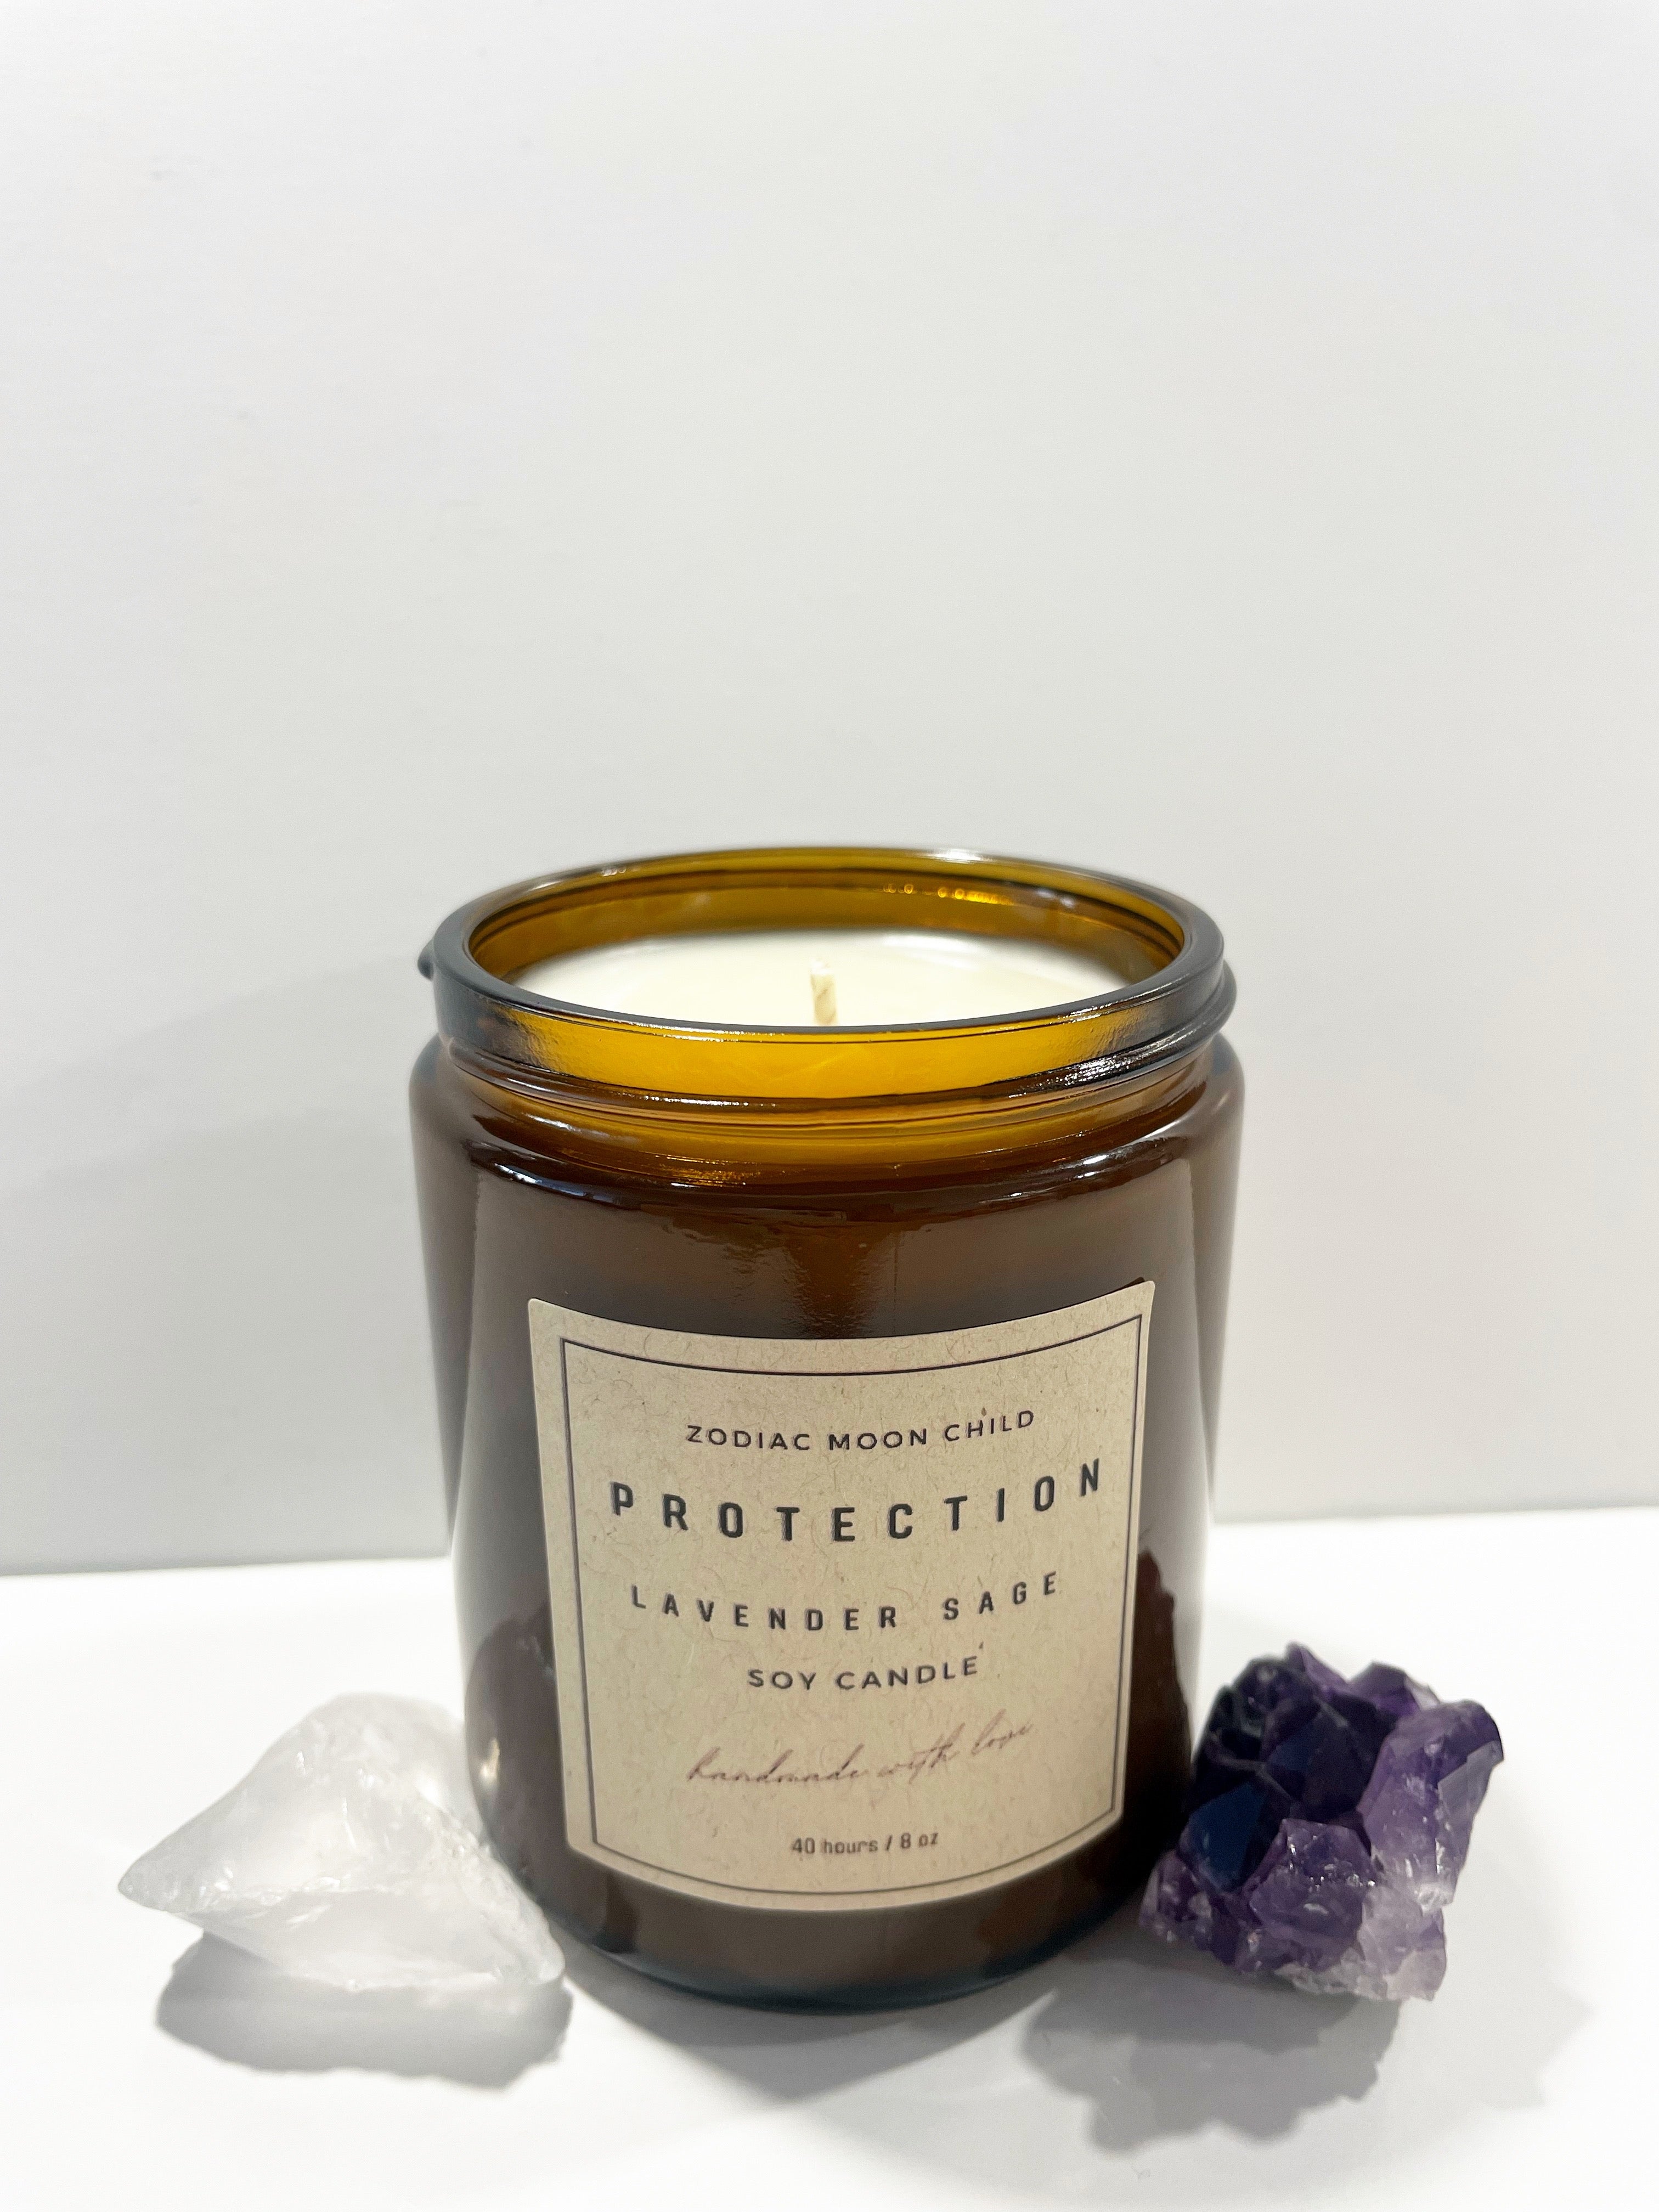 Protect Your Energy with Our Amber Spiritual Soy Candle - Embrace Positivity & Elevate Your Sacred Zen Space - 100% Natural Soy Wax, Energy